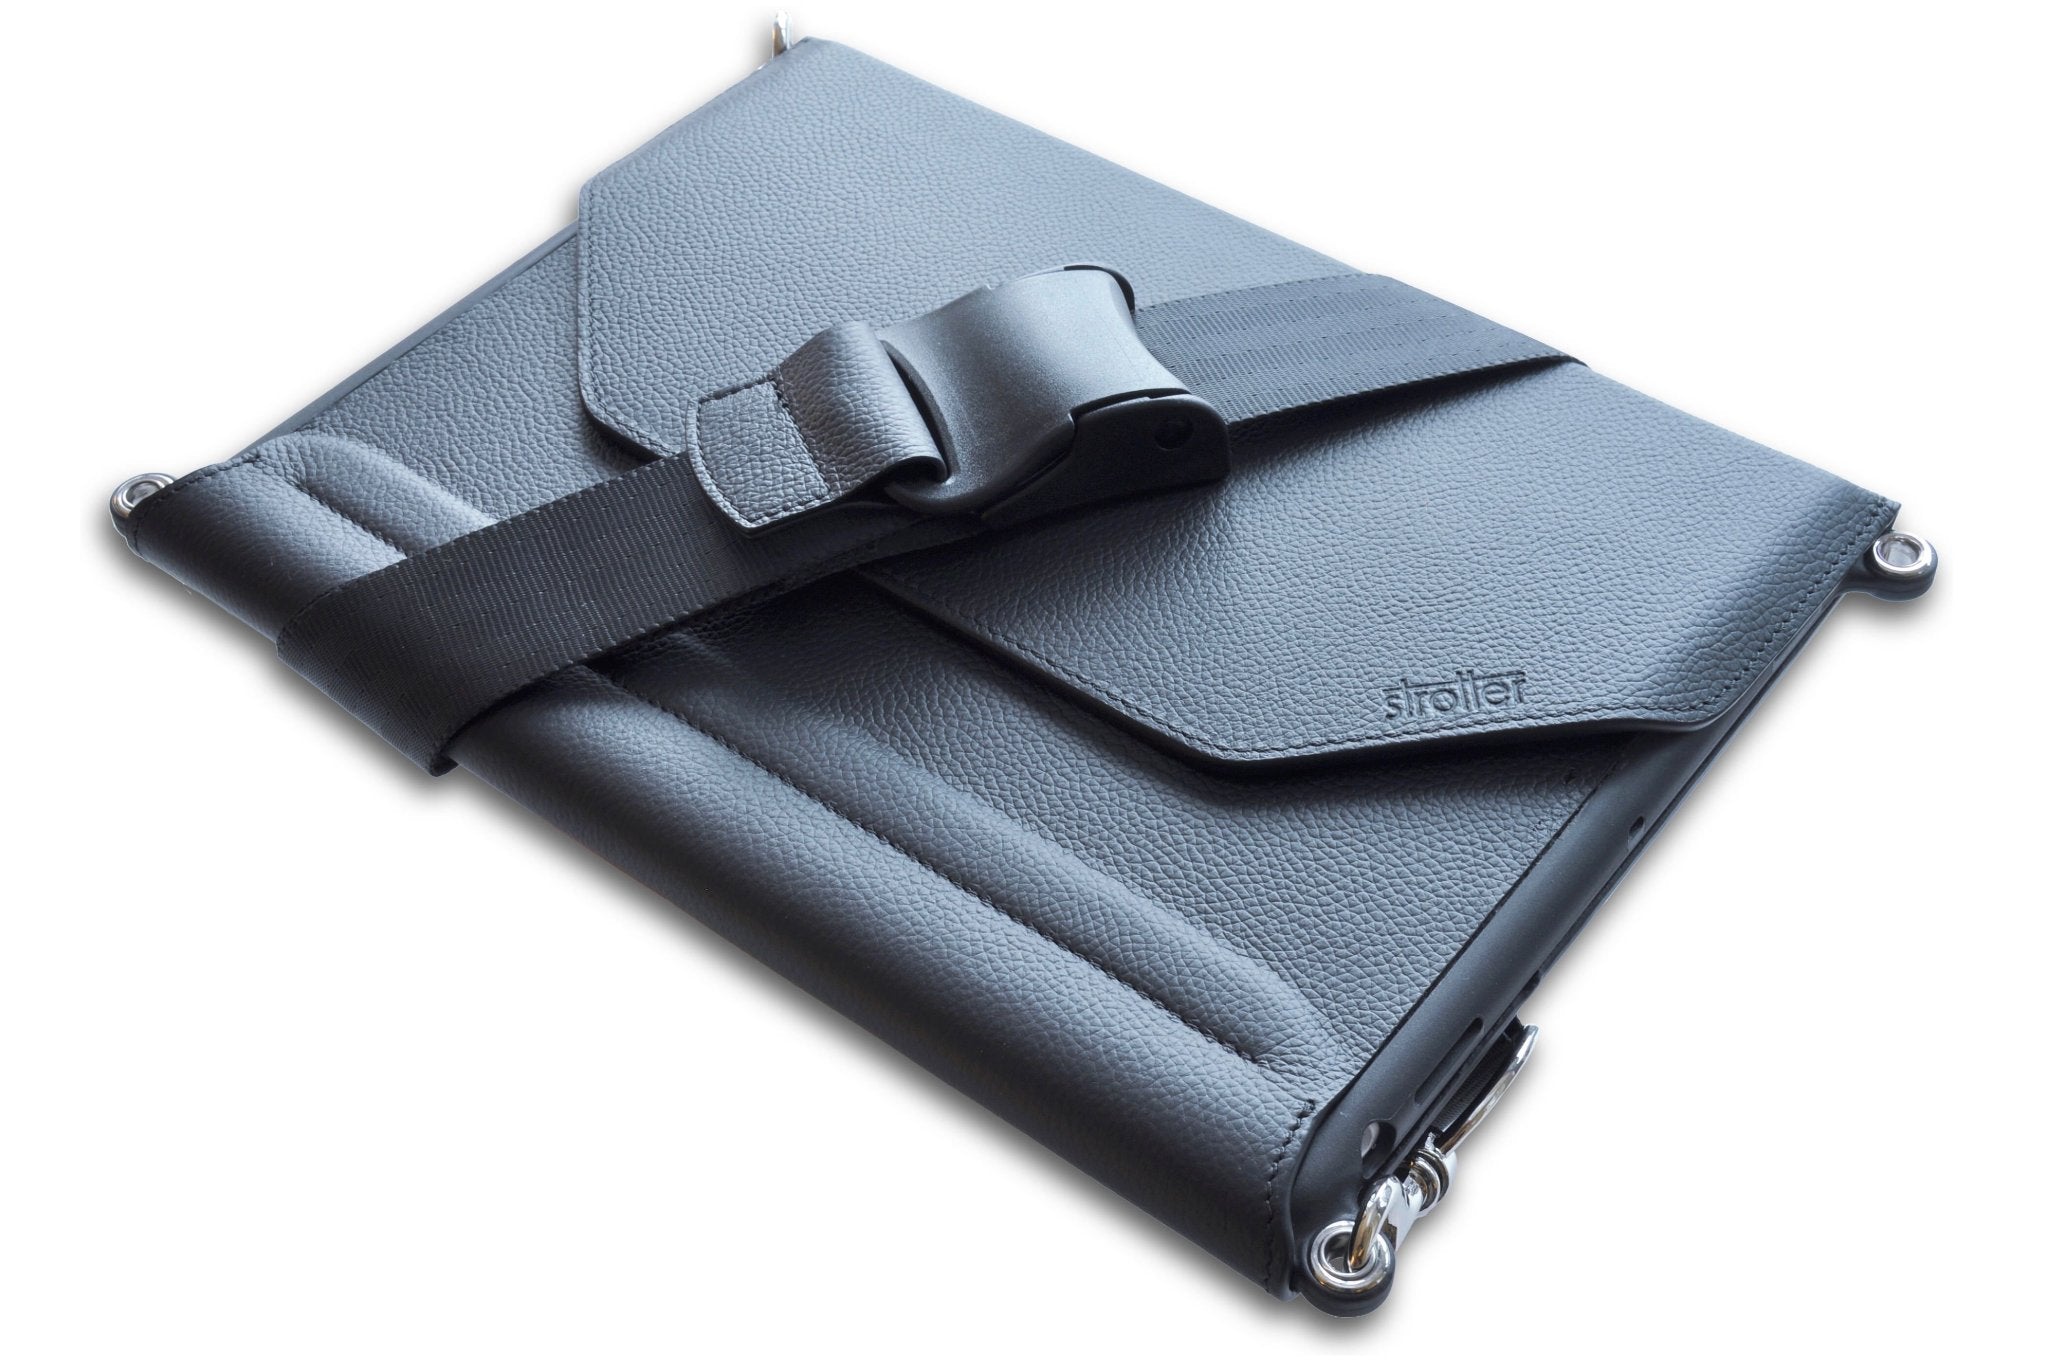 Leather iPad carrying case with shoulder strap, hands-free